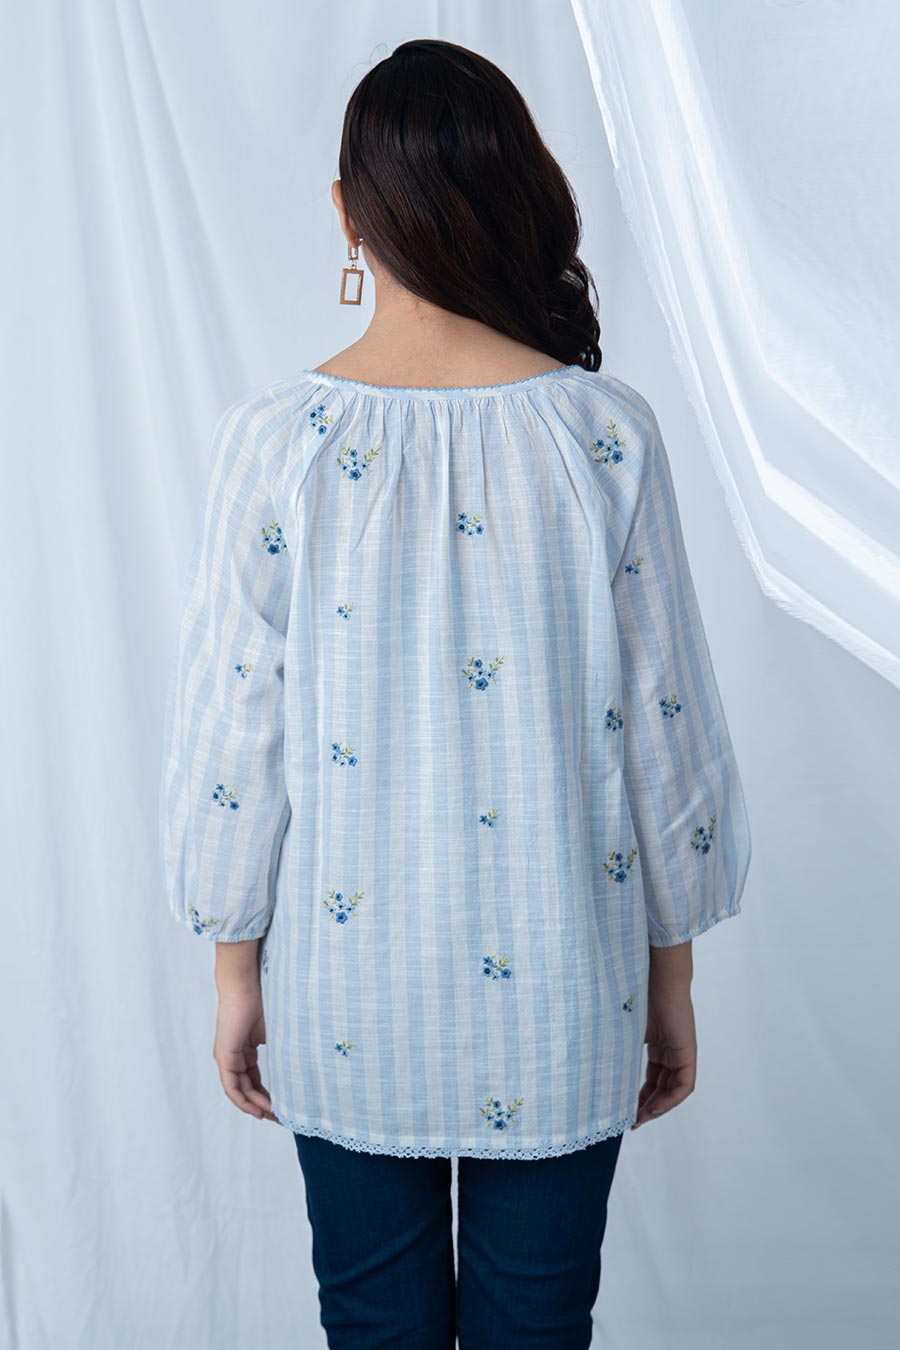 Blue Floral Motif Embroidered Top